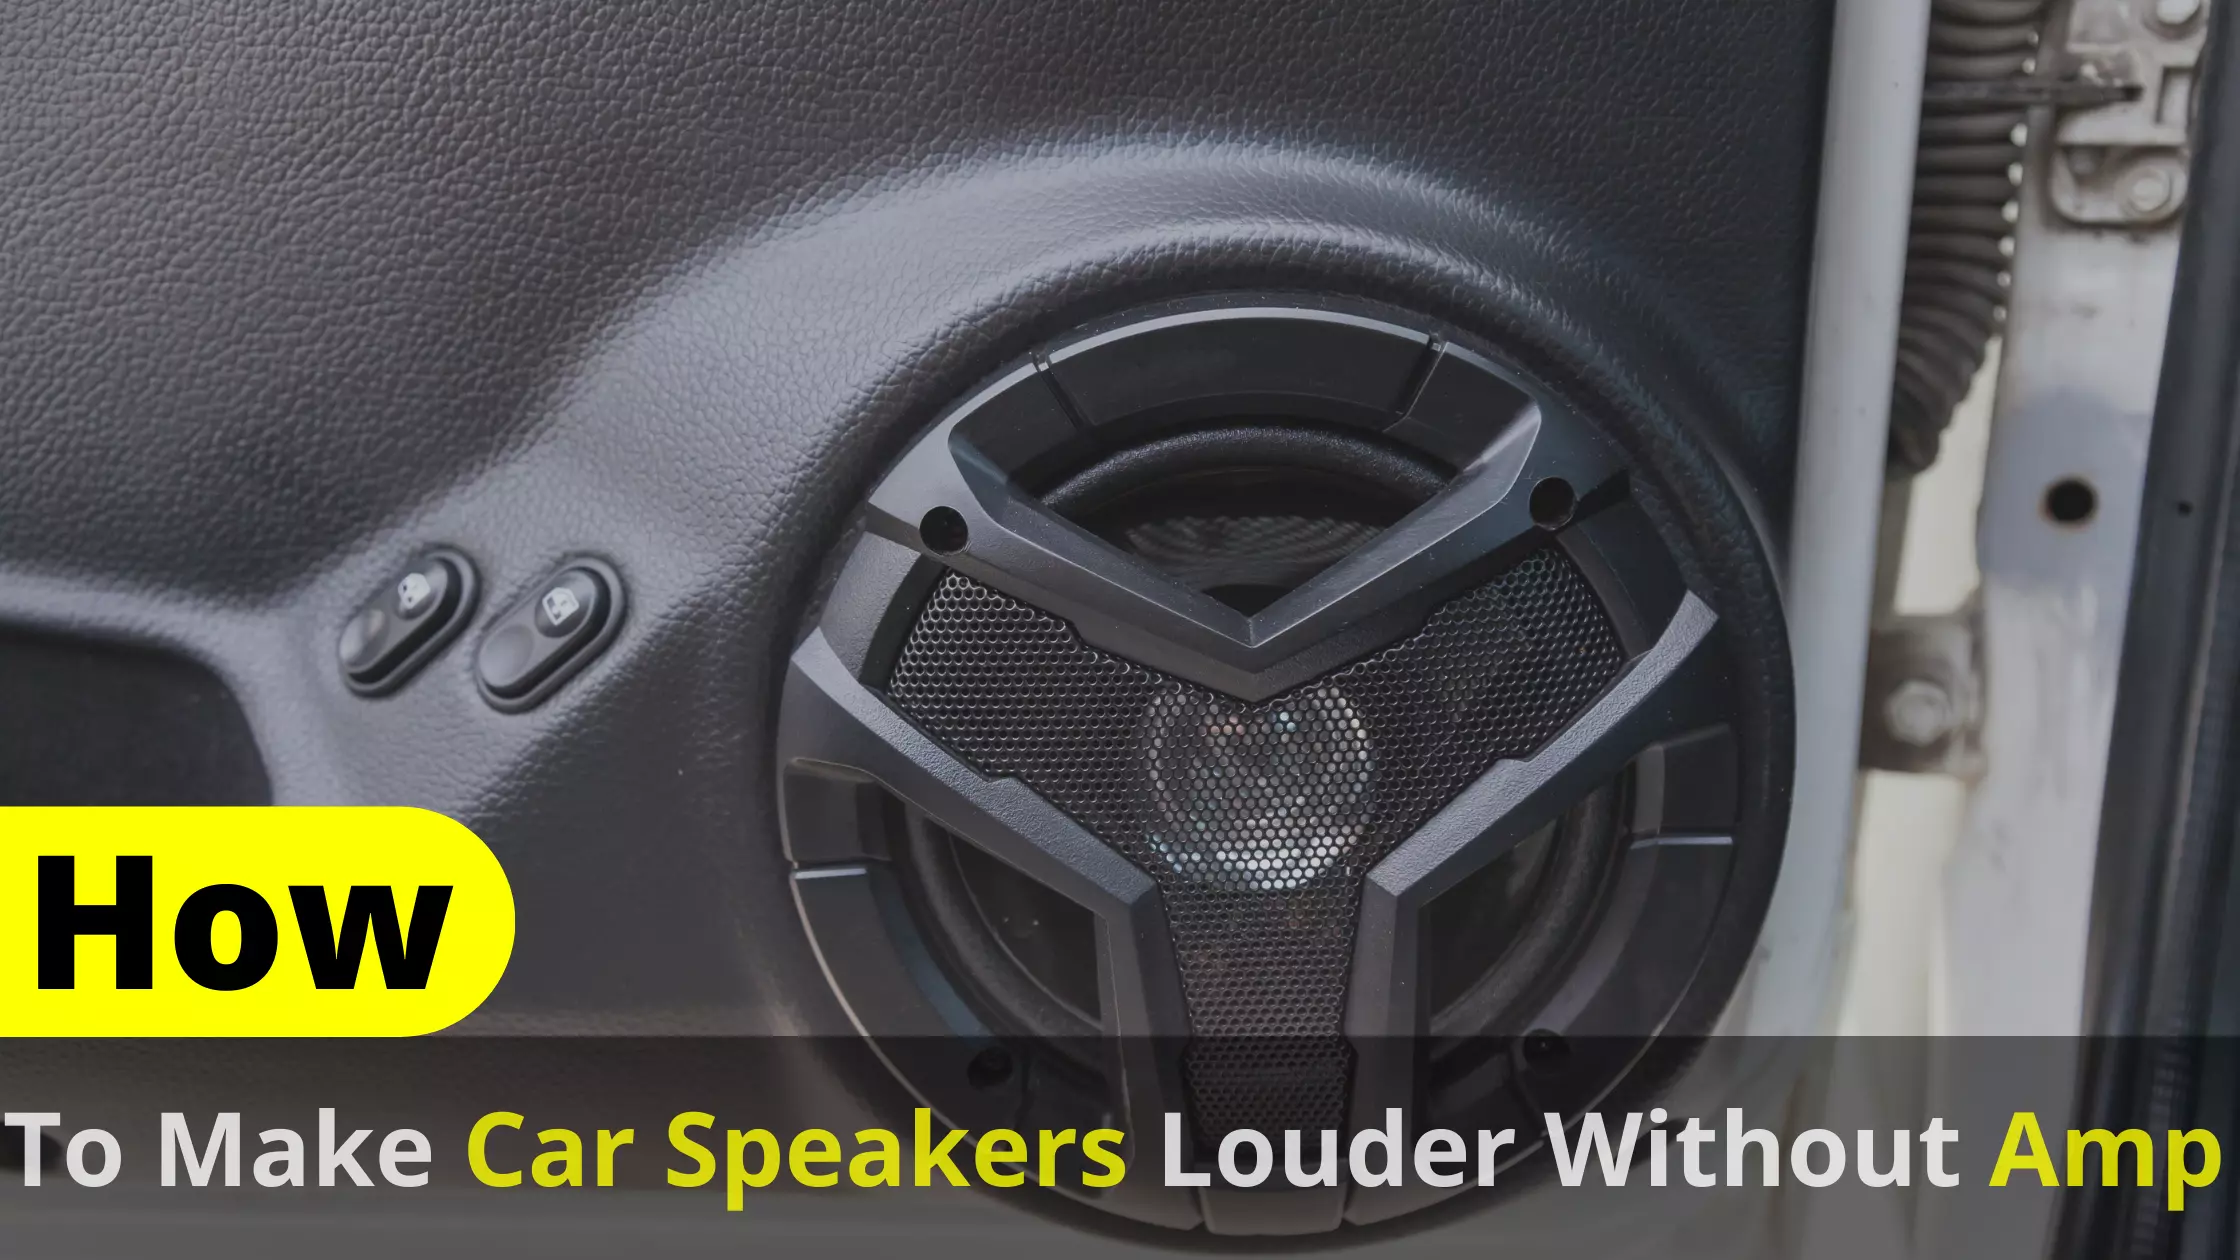 How To Make Car Speakers Louder Without Amp?